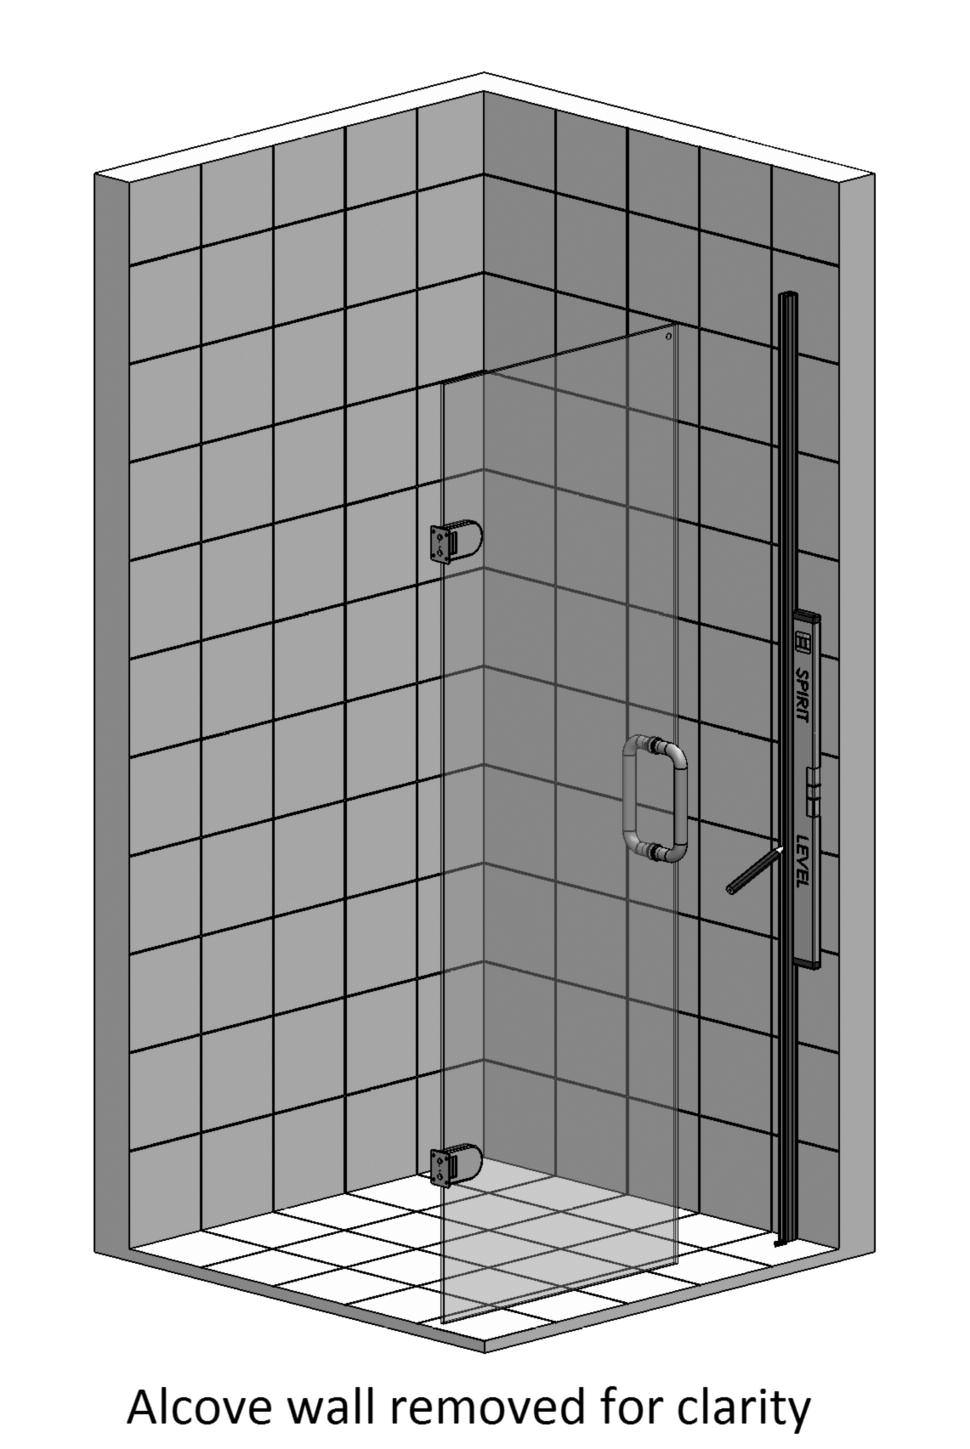 Step 4 - Panel Wall Profile ➁ ➄ ➃ ➆ ➅ 1. Place the door in the closed position. 2.